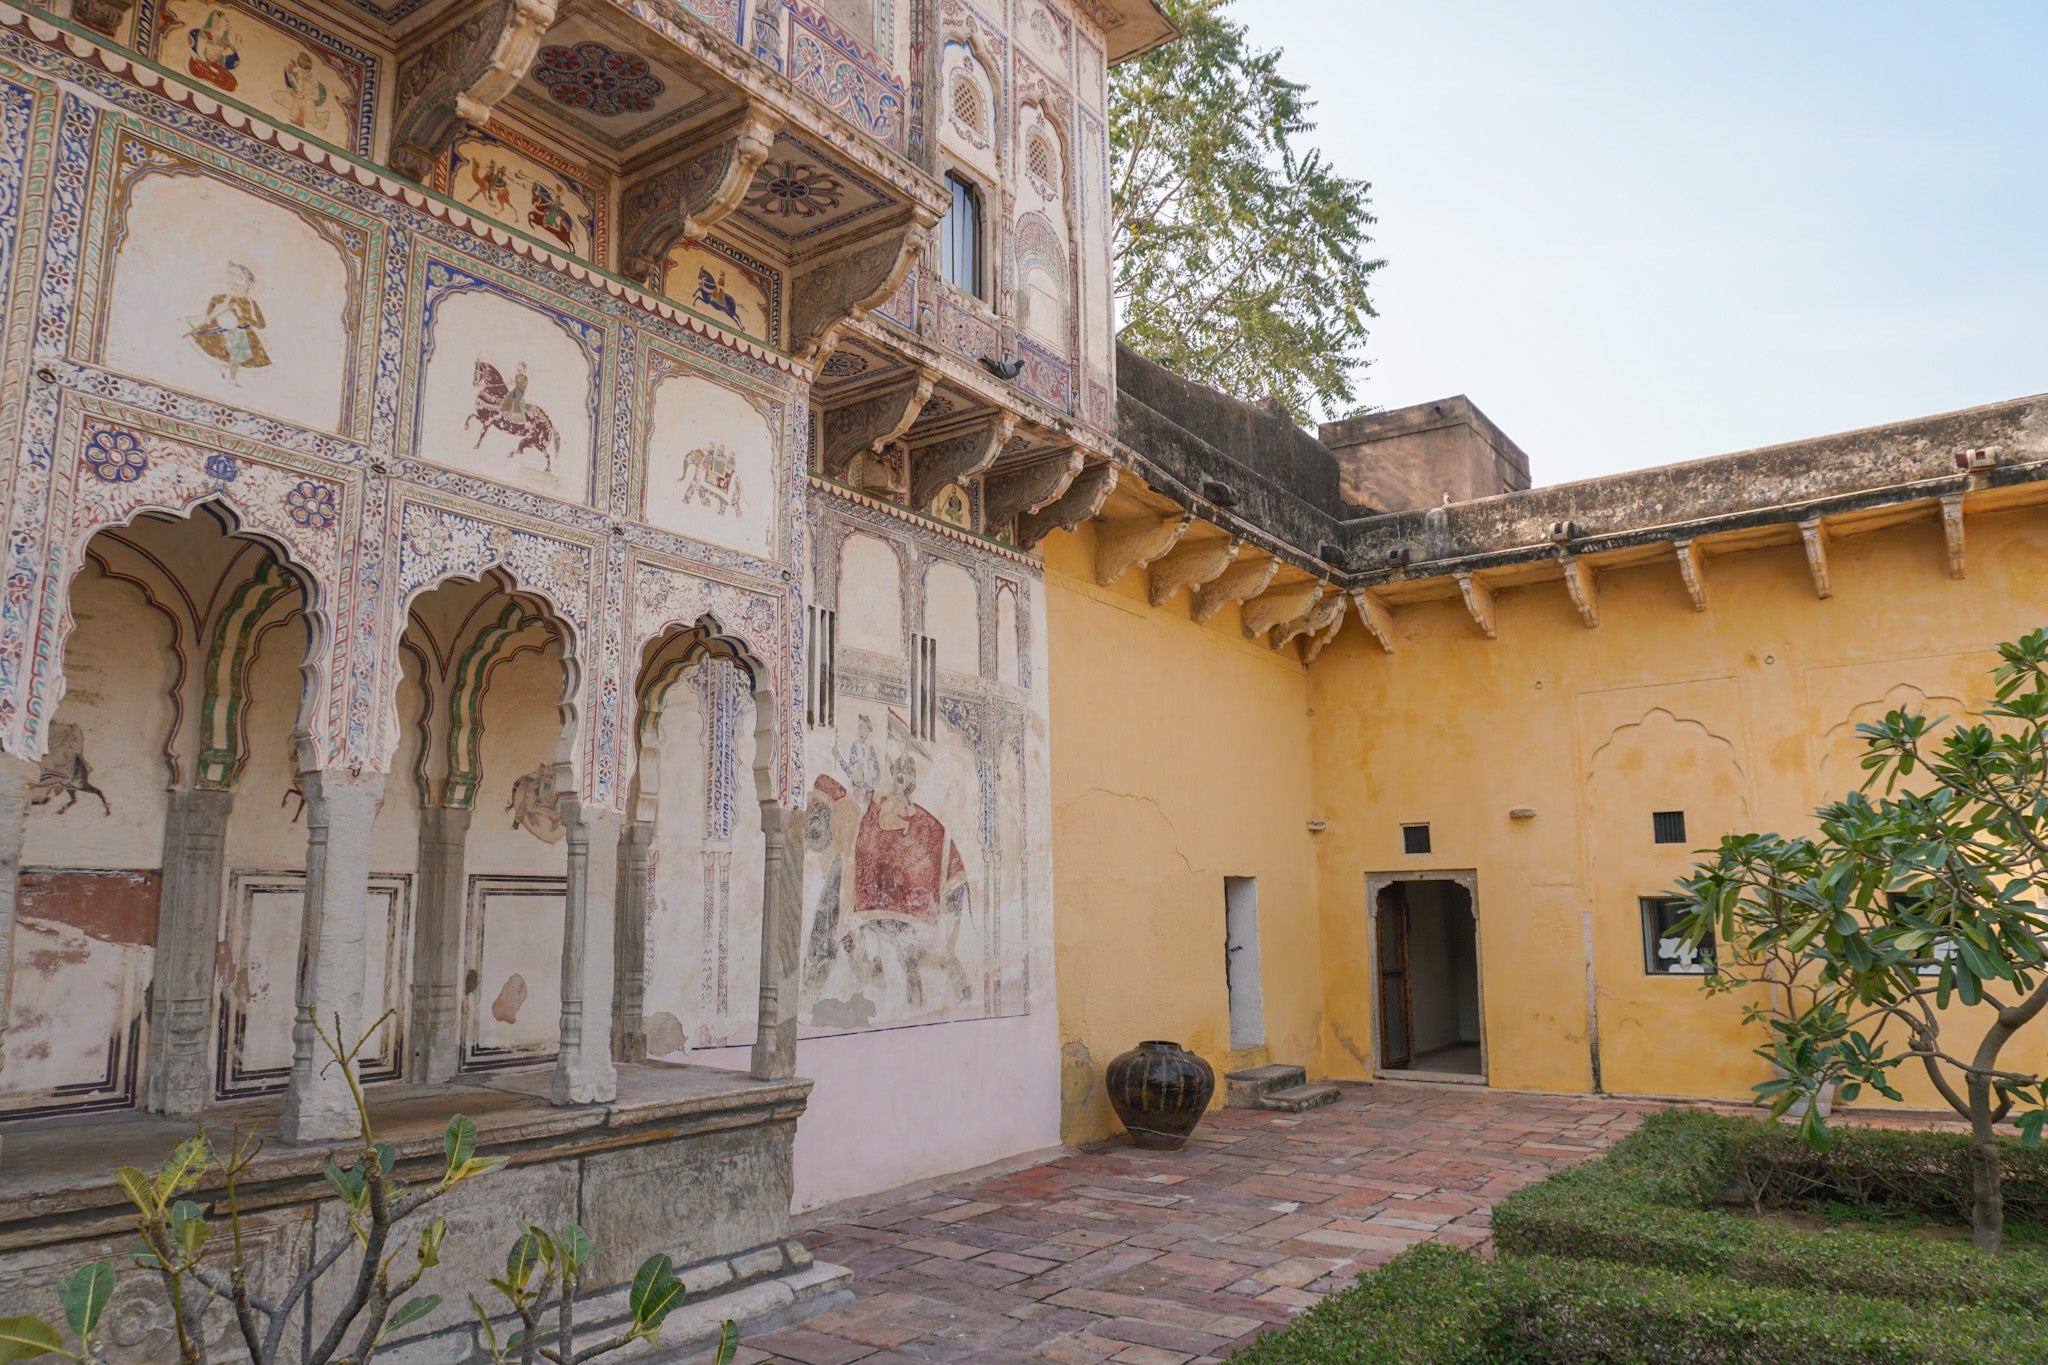 Deeppura Garh facade in India with yellow wall and painted frescoes